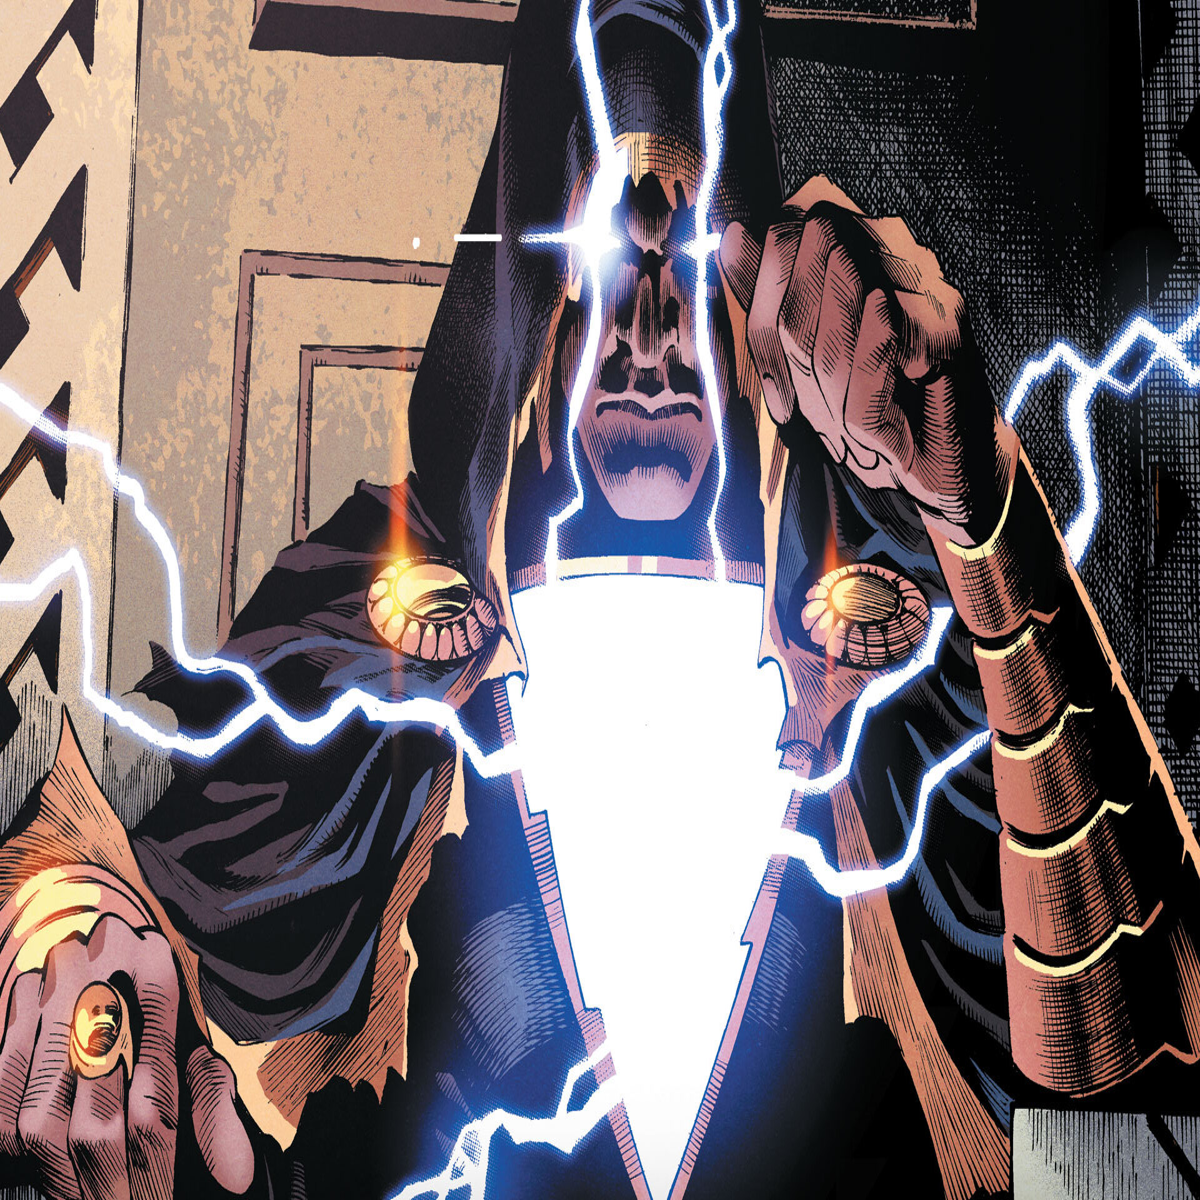 A New Black Adam Series from Christopher Priest and Rafa Sandoval